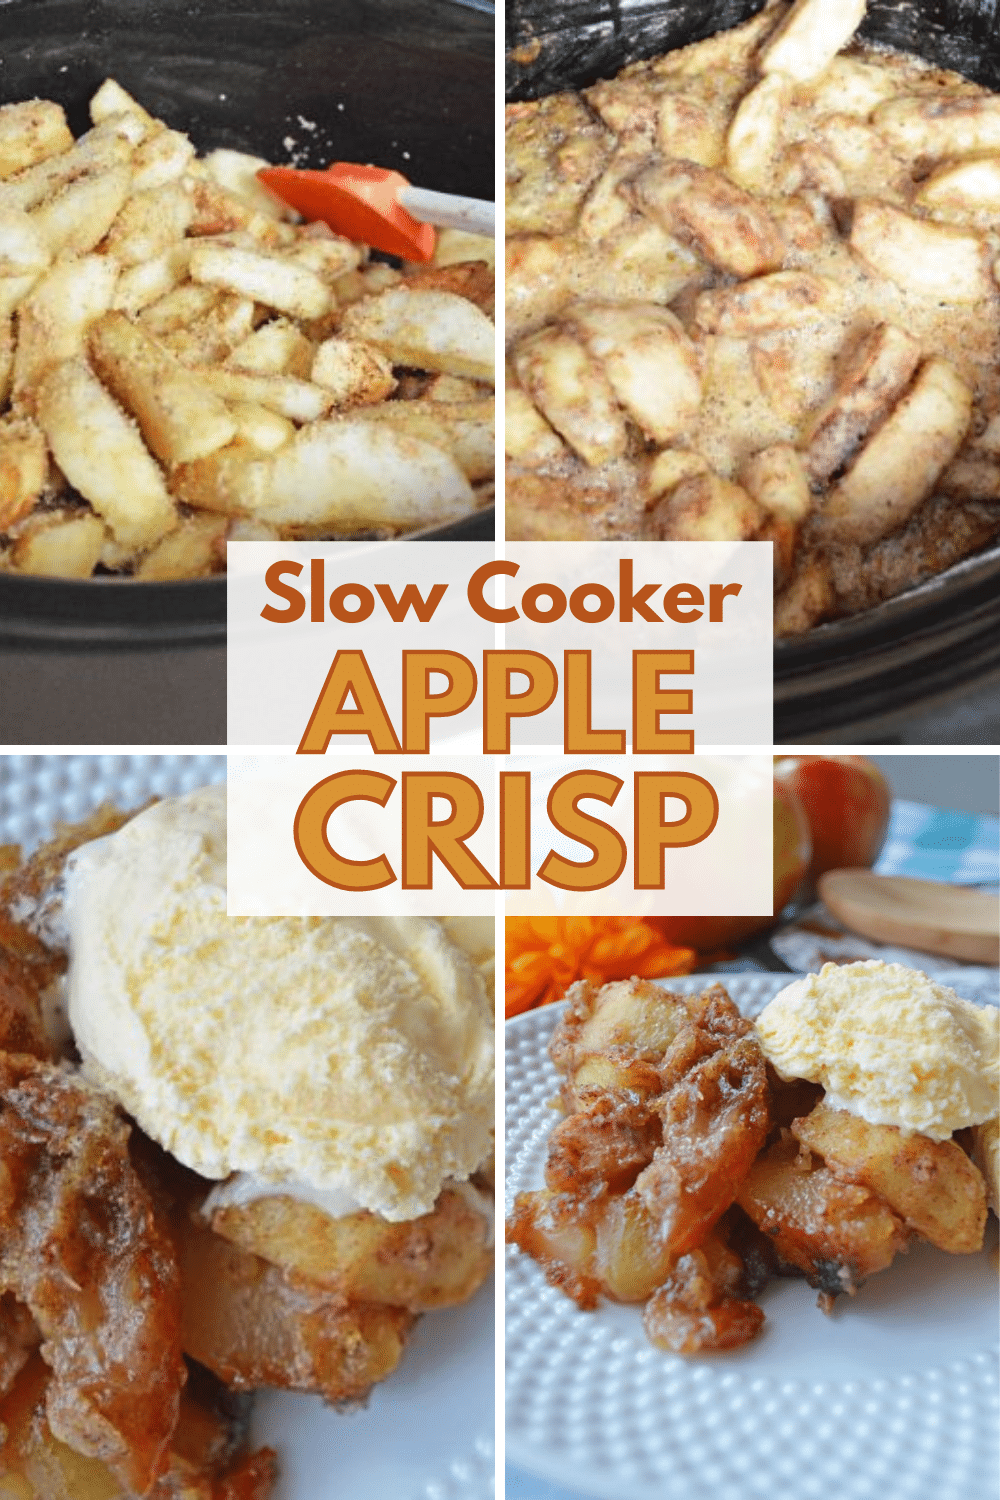 Slow Cooker Apple Crisp is a must-make dessert for fall. This simple crock pot dessert recipe will fill your home with the smells of cinnamon apples! #apples #5ingredients #slowcooker via @wondermomwannab